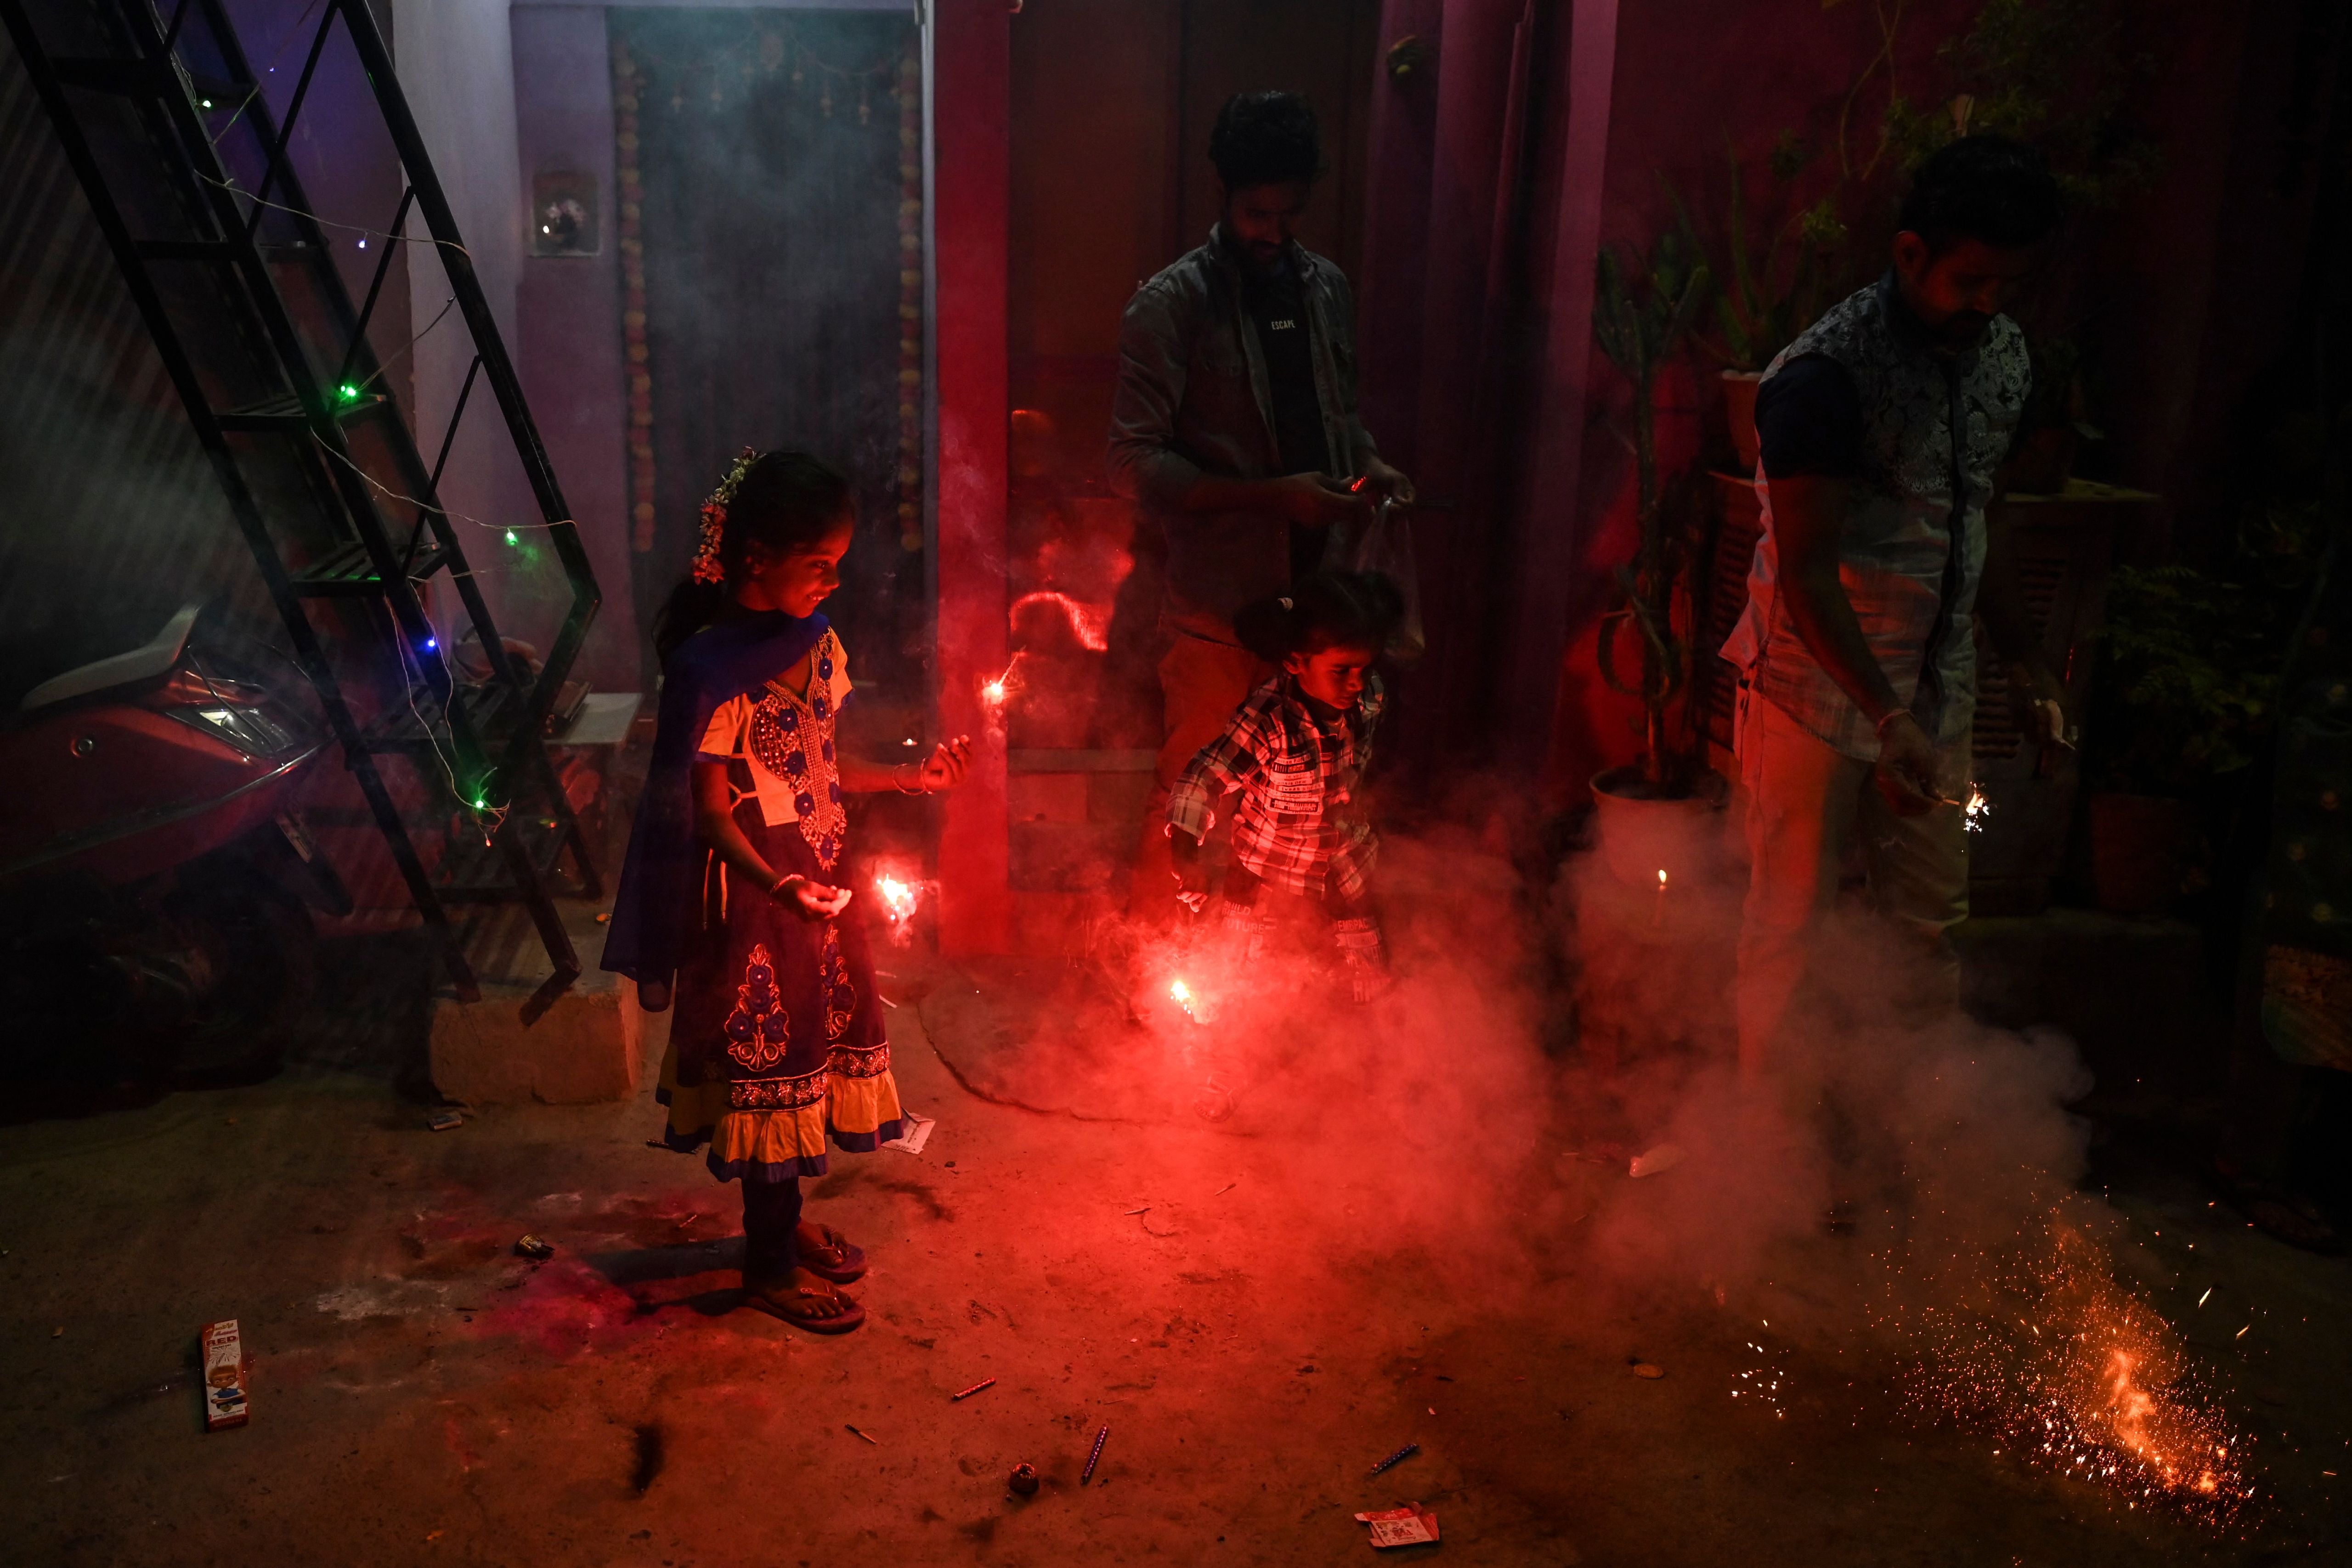 Children play with sparklers as they celebrate the Hindu festival Diwali or the Festival of Lights in New Delhi